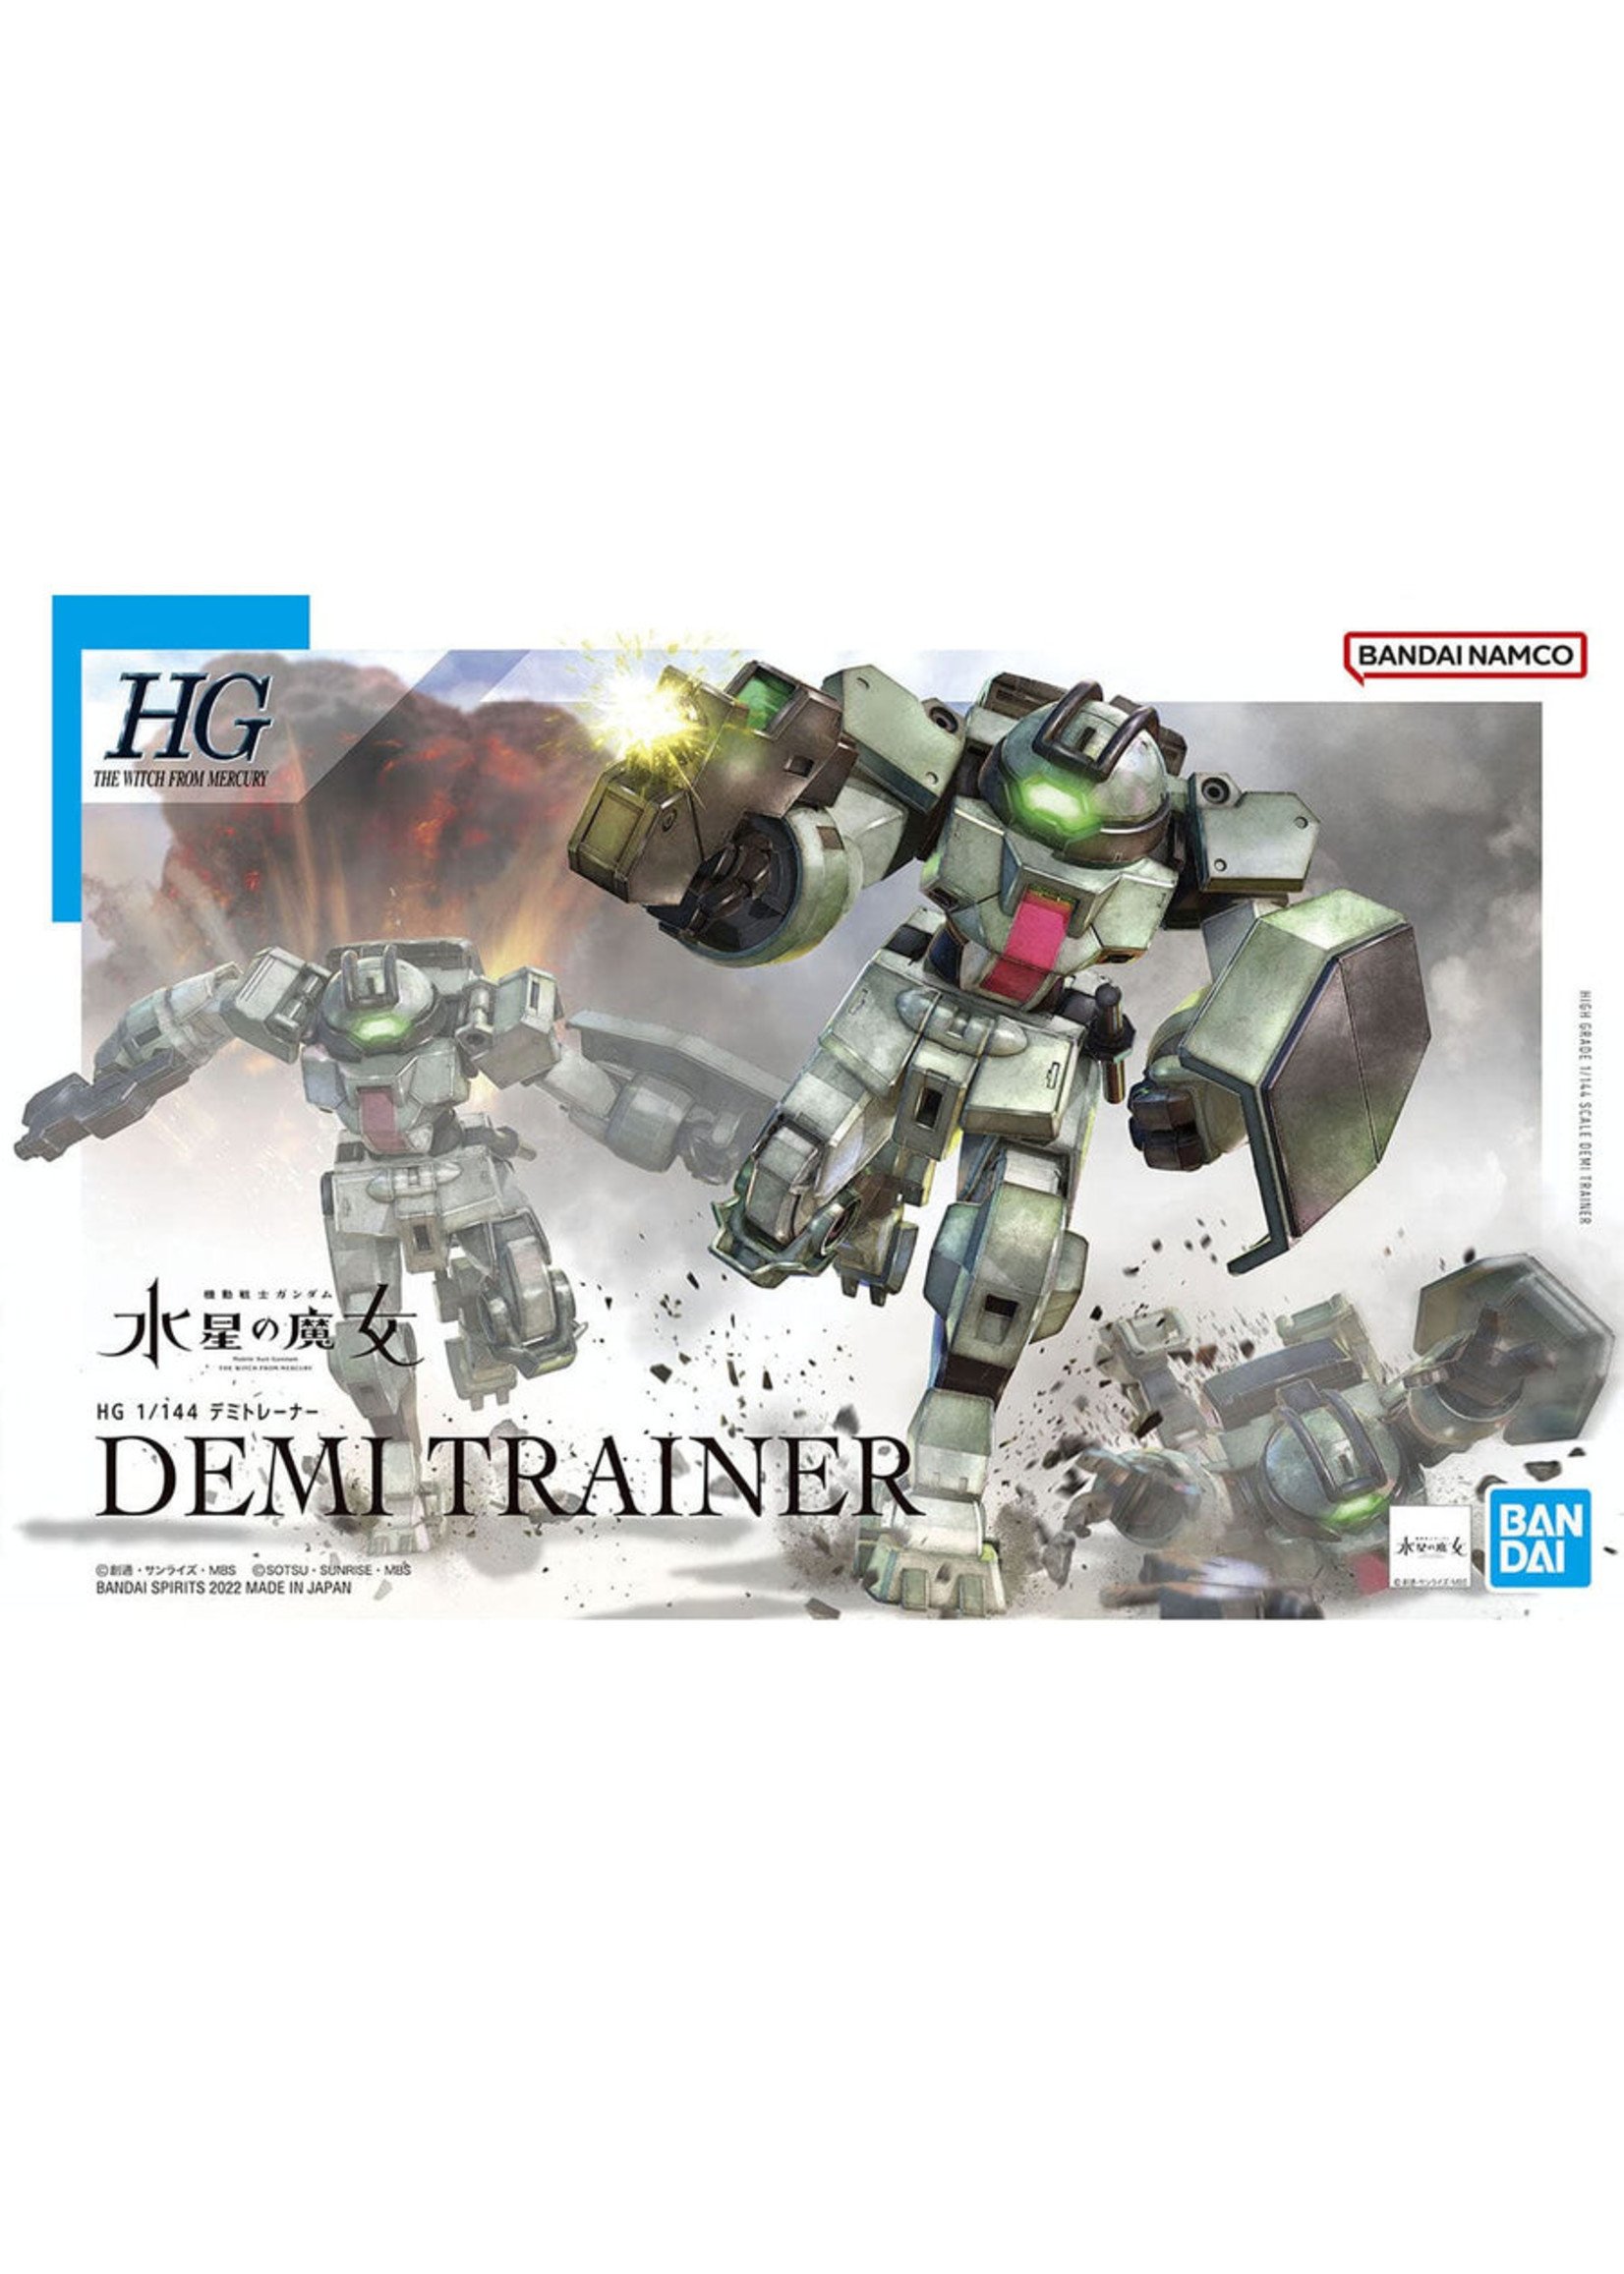 Bandai #09 "The Witch From Mercury" Demi Trainer